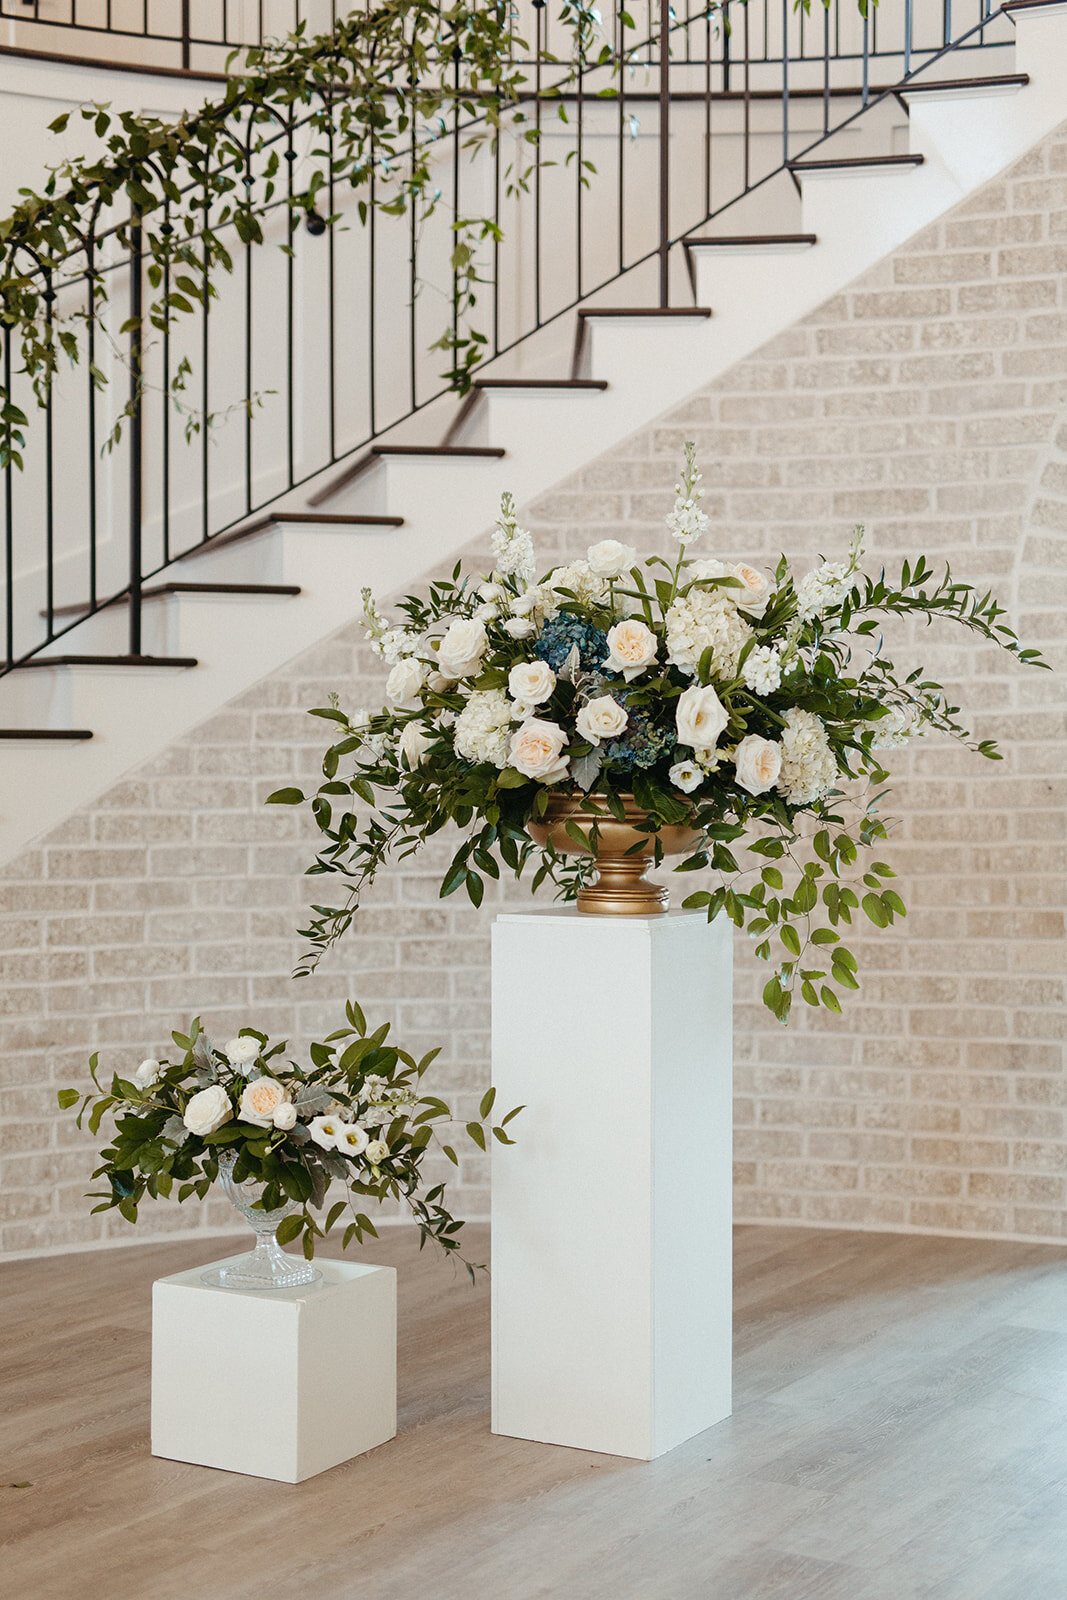 White floral arrangements on white stands in a bright and airy room with whitewashed brick staircase behind.